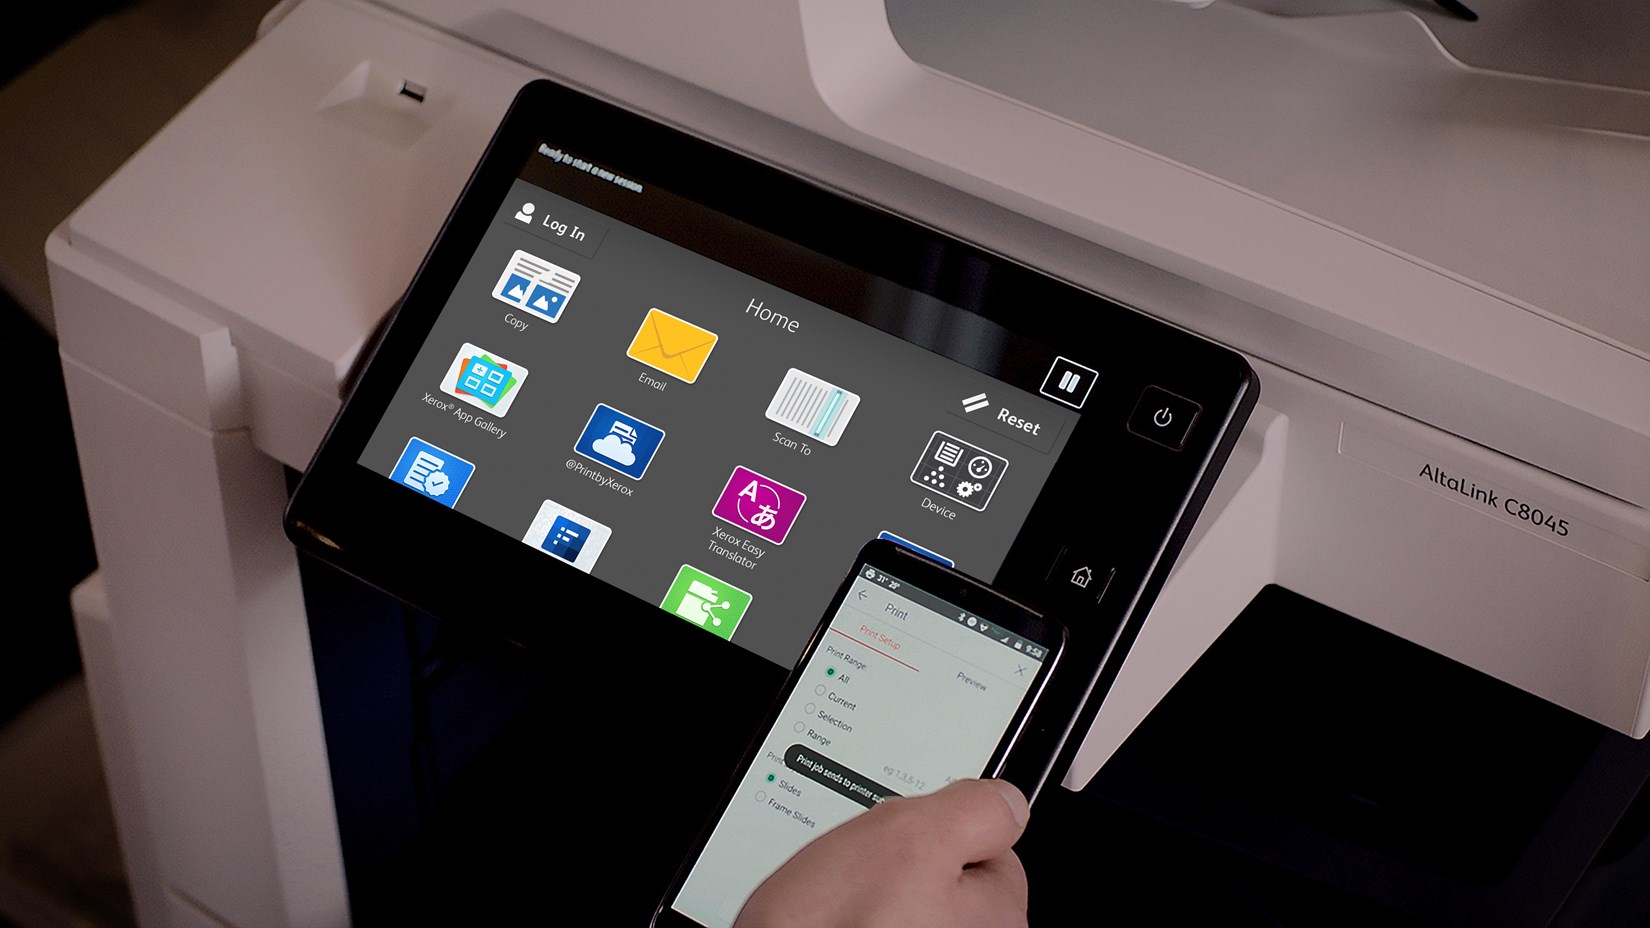 Close-up of the ConnectKey interactive touchscreen on a Xerox AltaLink C8045 printer with a person operating a smartphone via mobile printing. The screen shows various application icons for ease of use, illustrating how technology promotes integration and usability in the modern office.